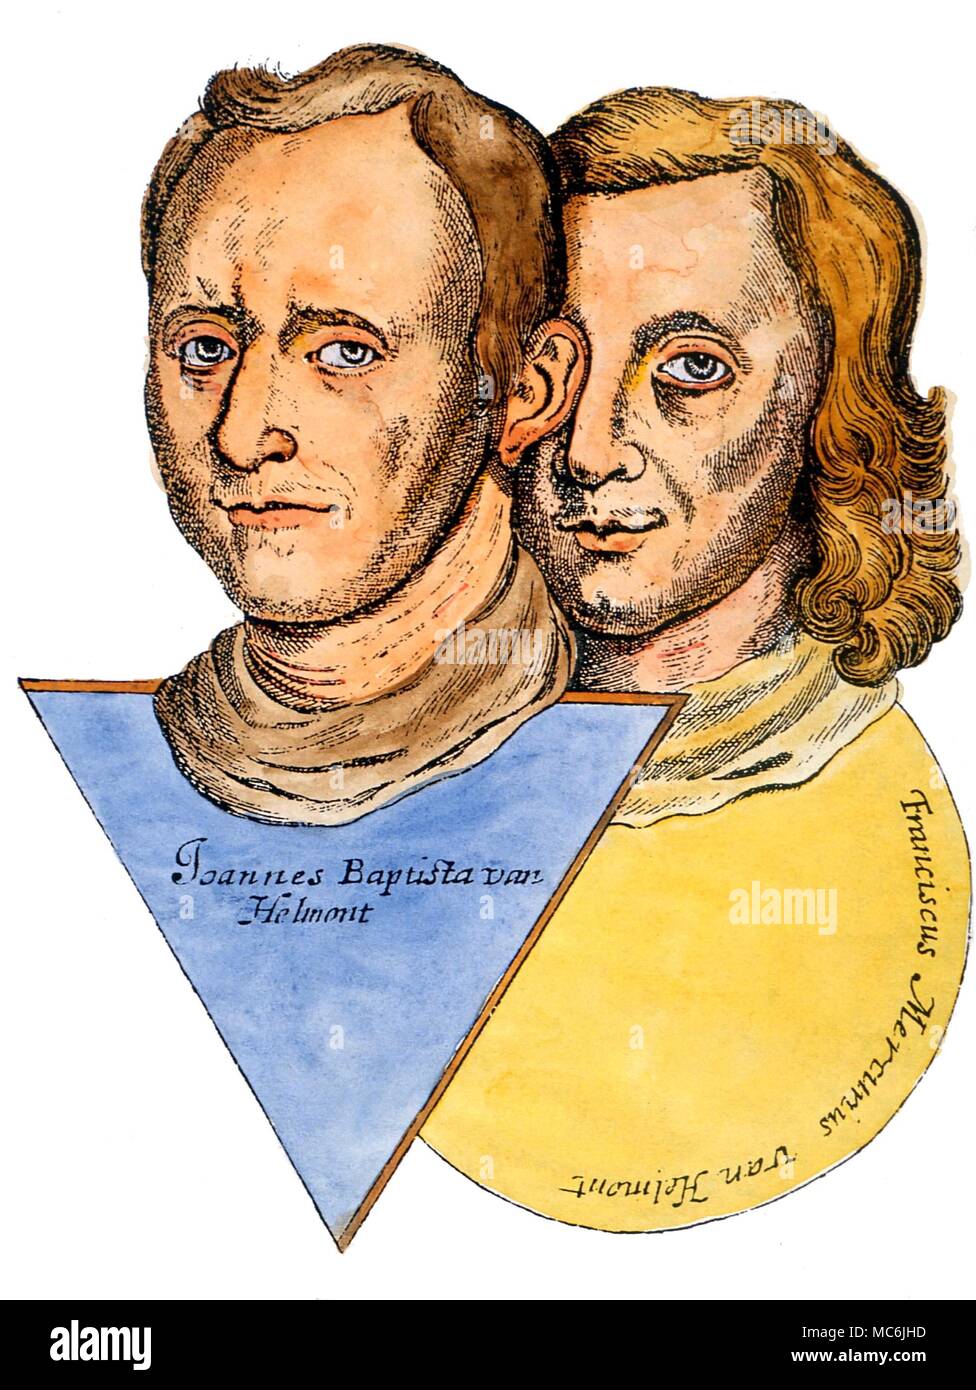 OCCULTISTS - THE VAN HELMONTS. Francis Mercurius van Helmont (1618-1699)  and his father, Jean Baptist, (1577-1644), Rosicrucians and alchemists,  whose teachings profoundly influenced 17th century Britain Stock Photo -  Alamy